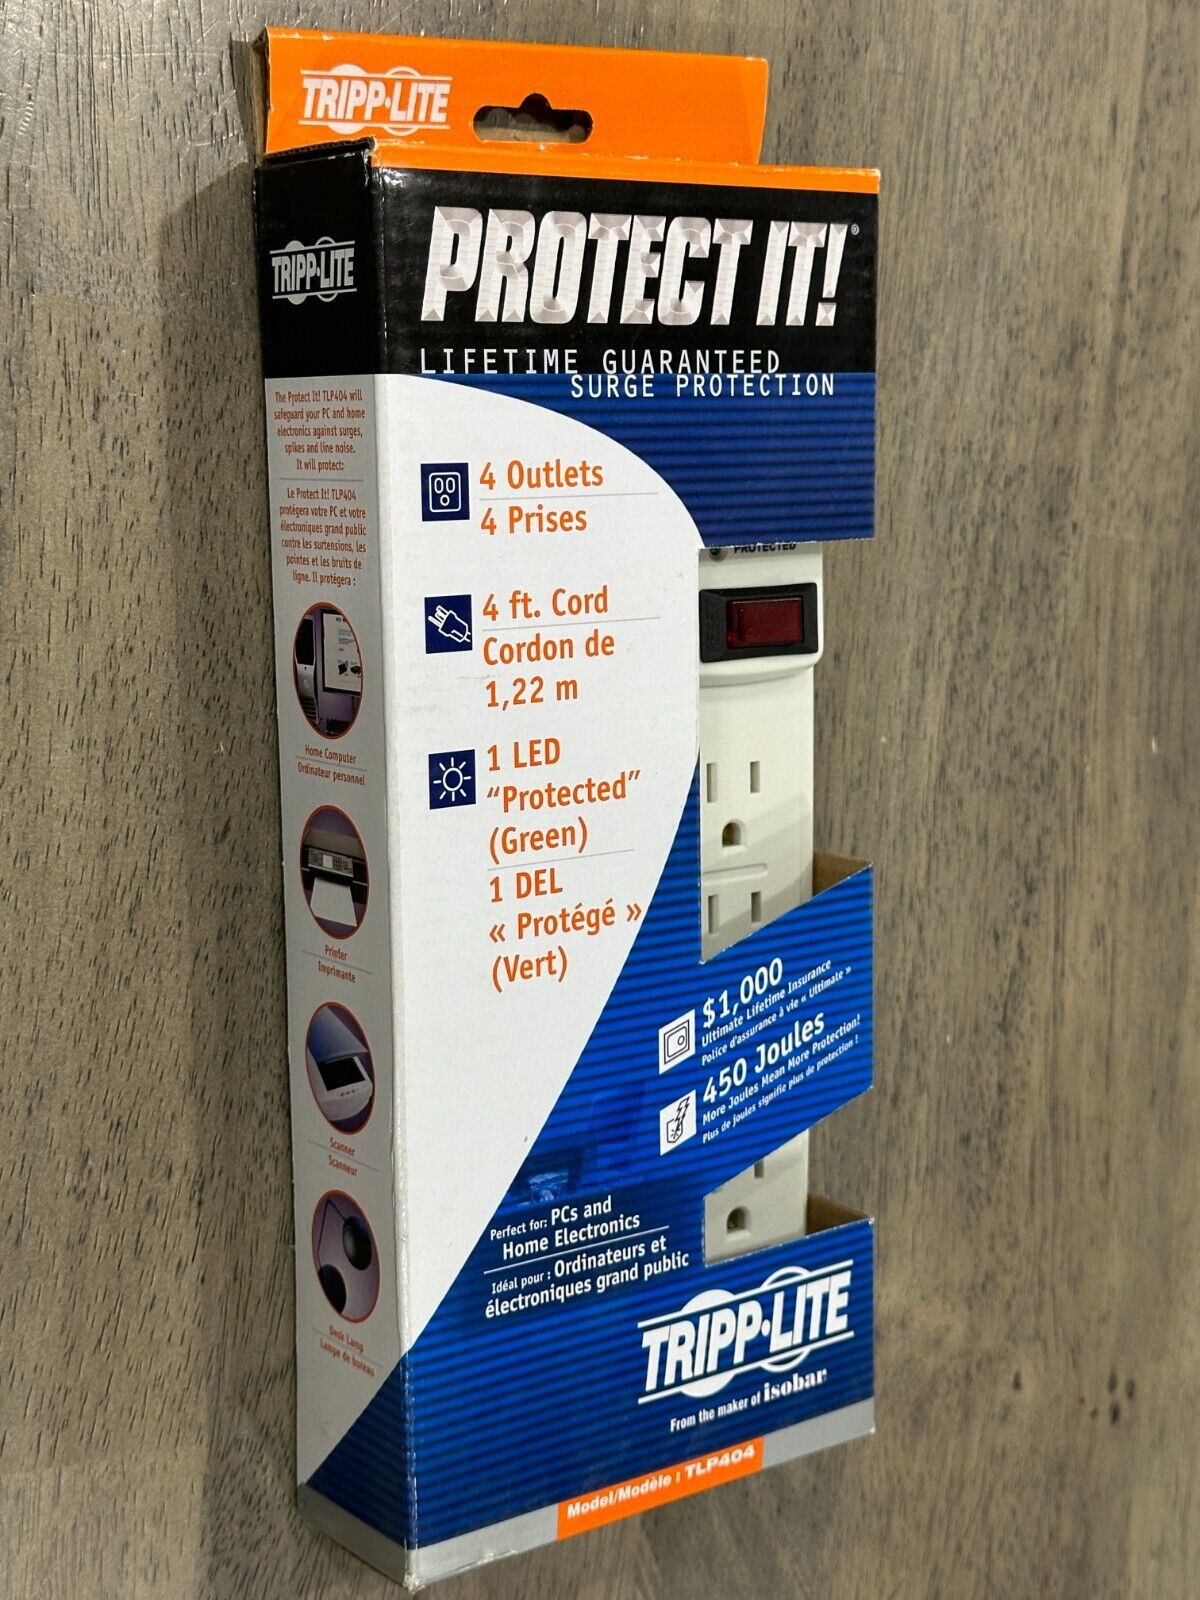 (Lot of 2) Protectit “Tripp-Lite” 4 Outlets 120v Surge Suppressor Made By Isobar